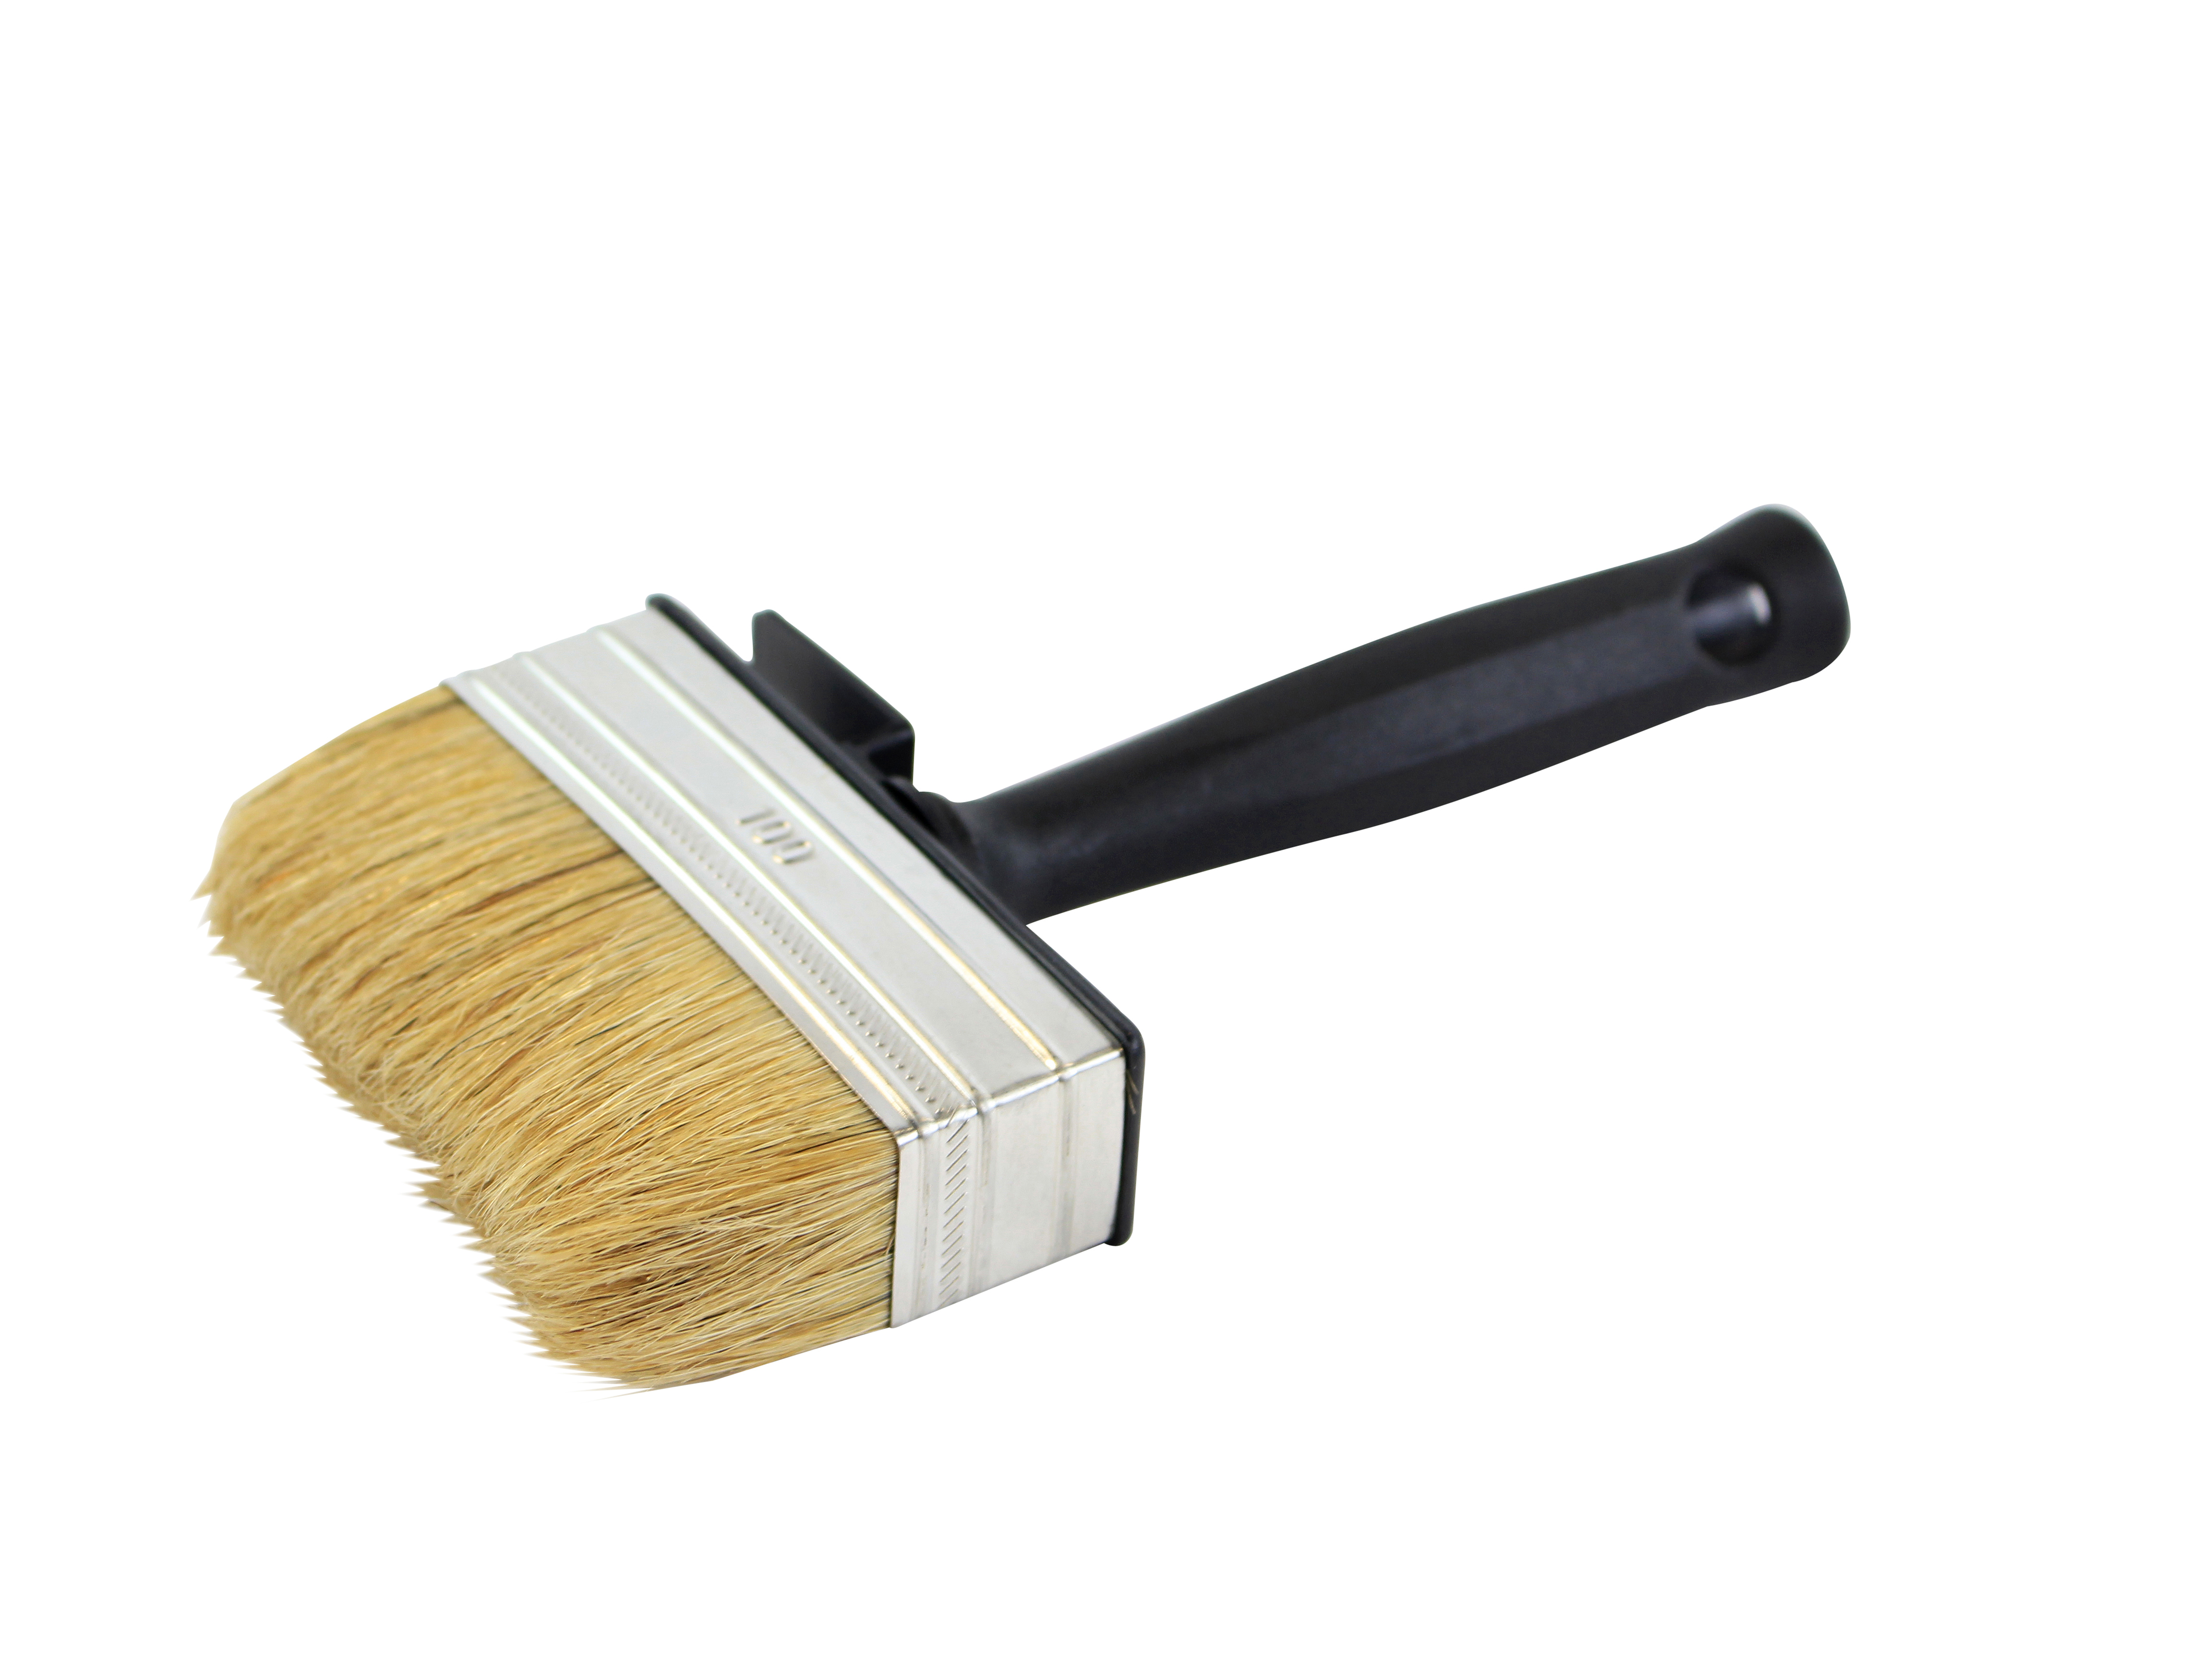 Paint brush block - Suitable for coatings and floor paints